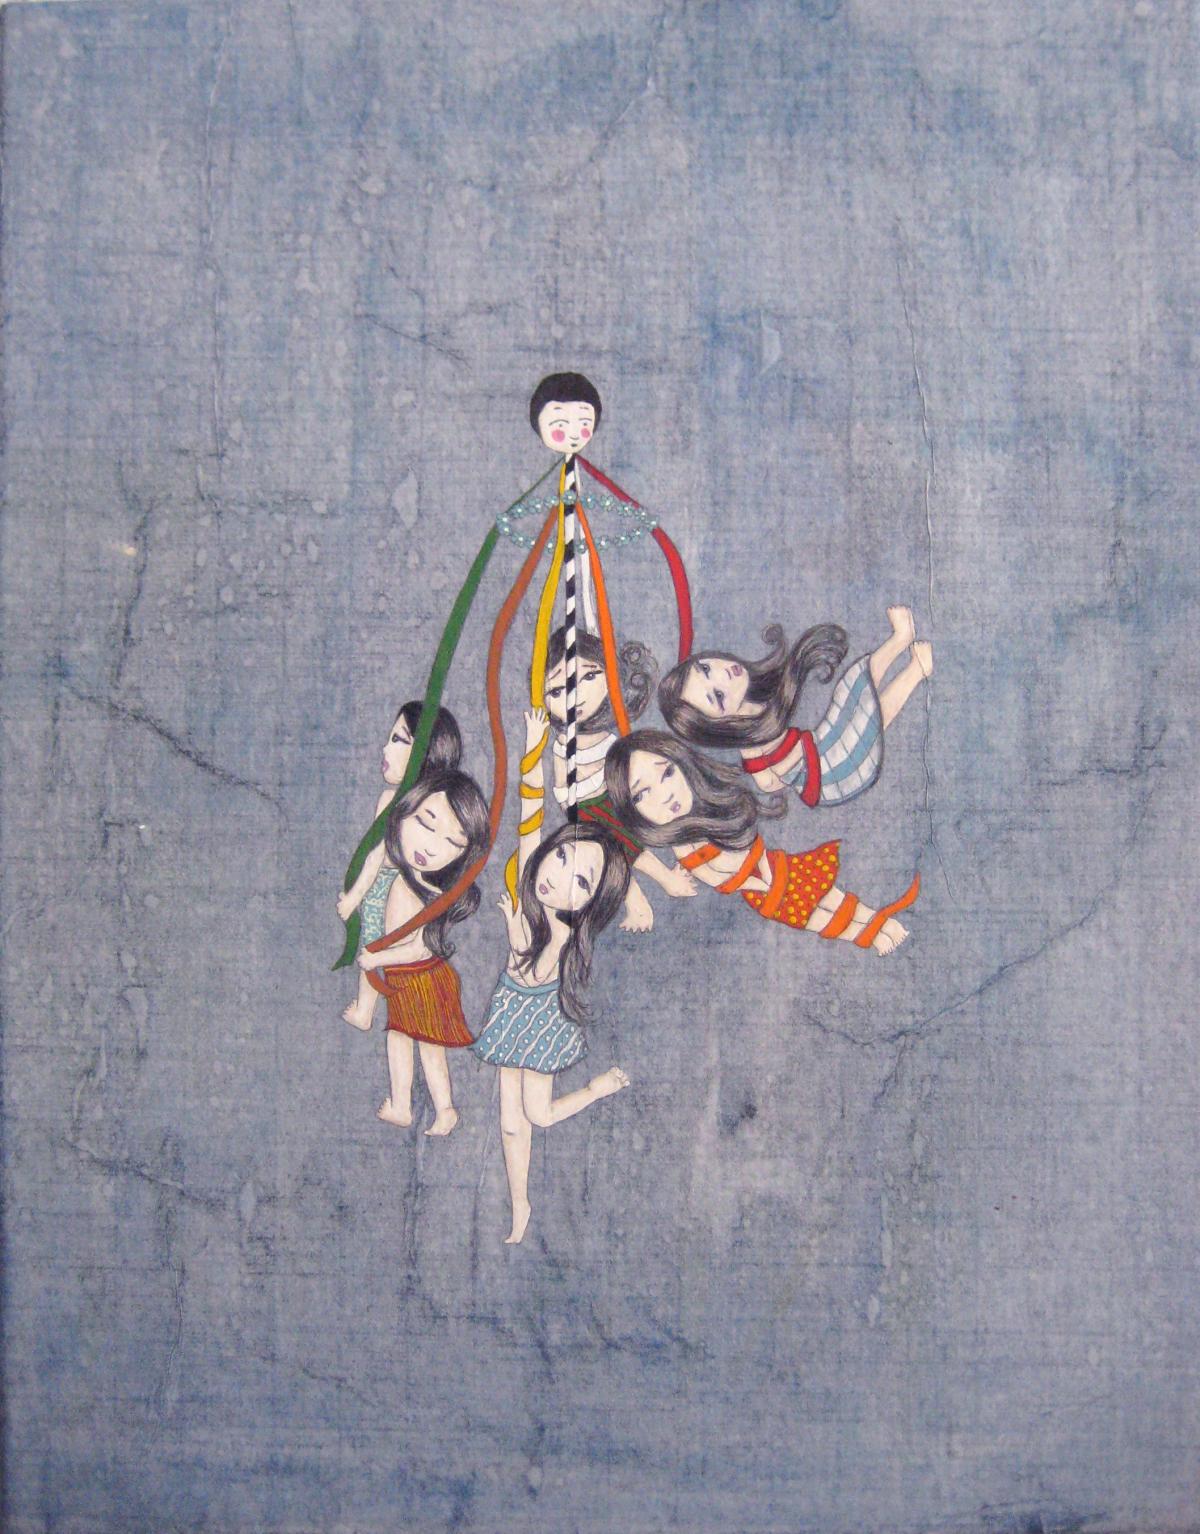 Artwork by Kyung Jeon titled Karnival Maypole, 2011, Watercolor, gouache and pencil on rice paper on canvas on wood panel, 14 x 11 inches, 35.6 x 27.9 cm